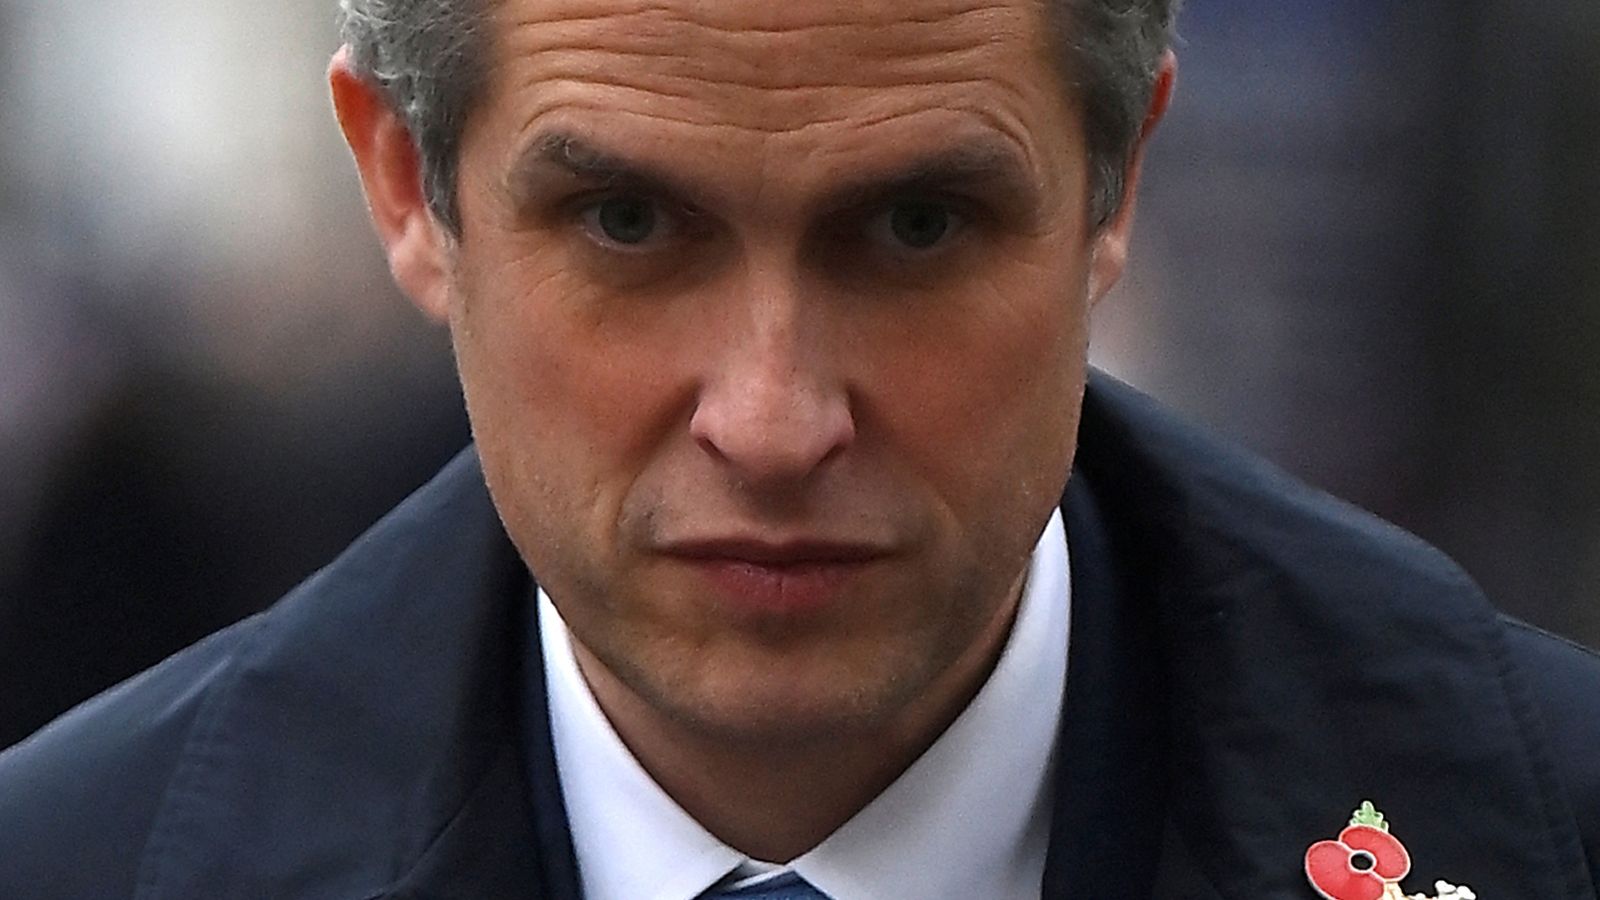 Ex-cabinet minister Sir Gavin Williamson told to apologise to MPs for bullying former chief whip